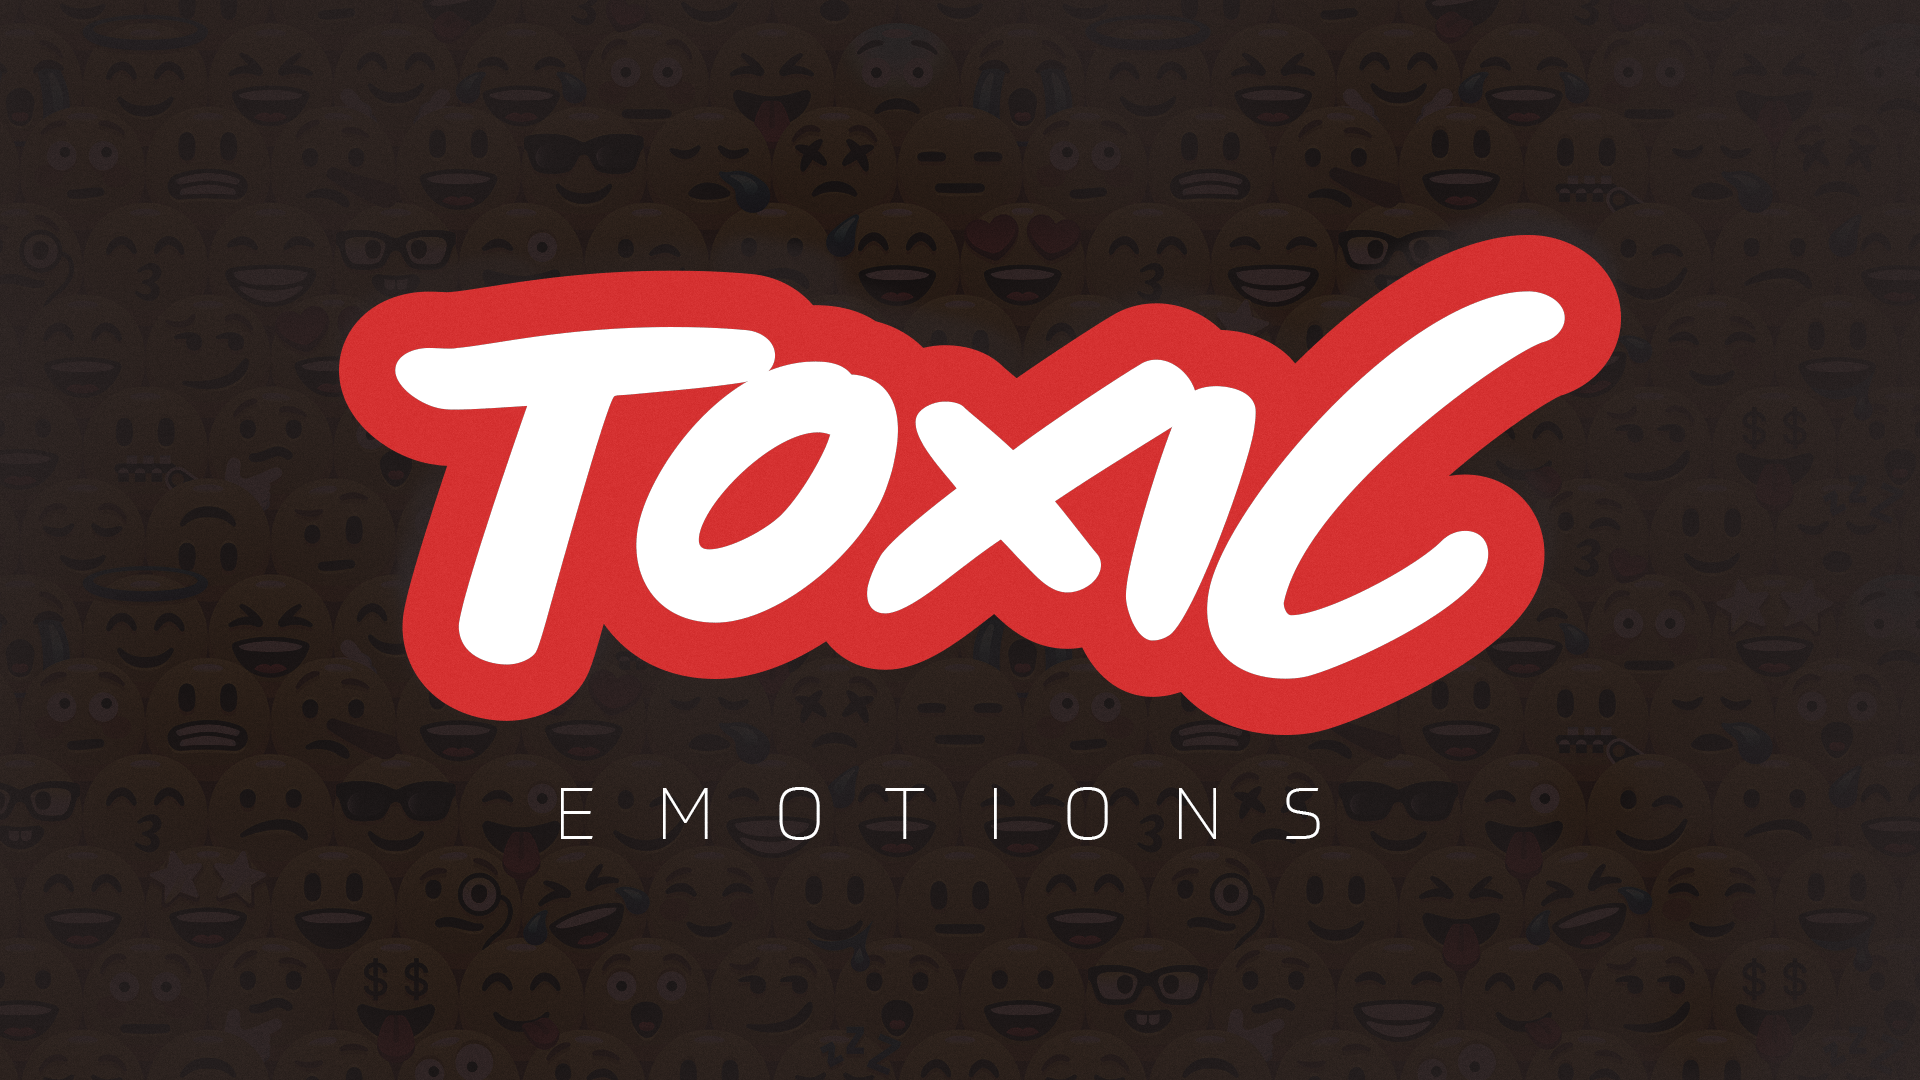 Toxic Emotions: Anger